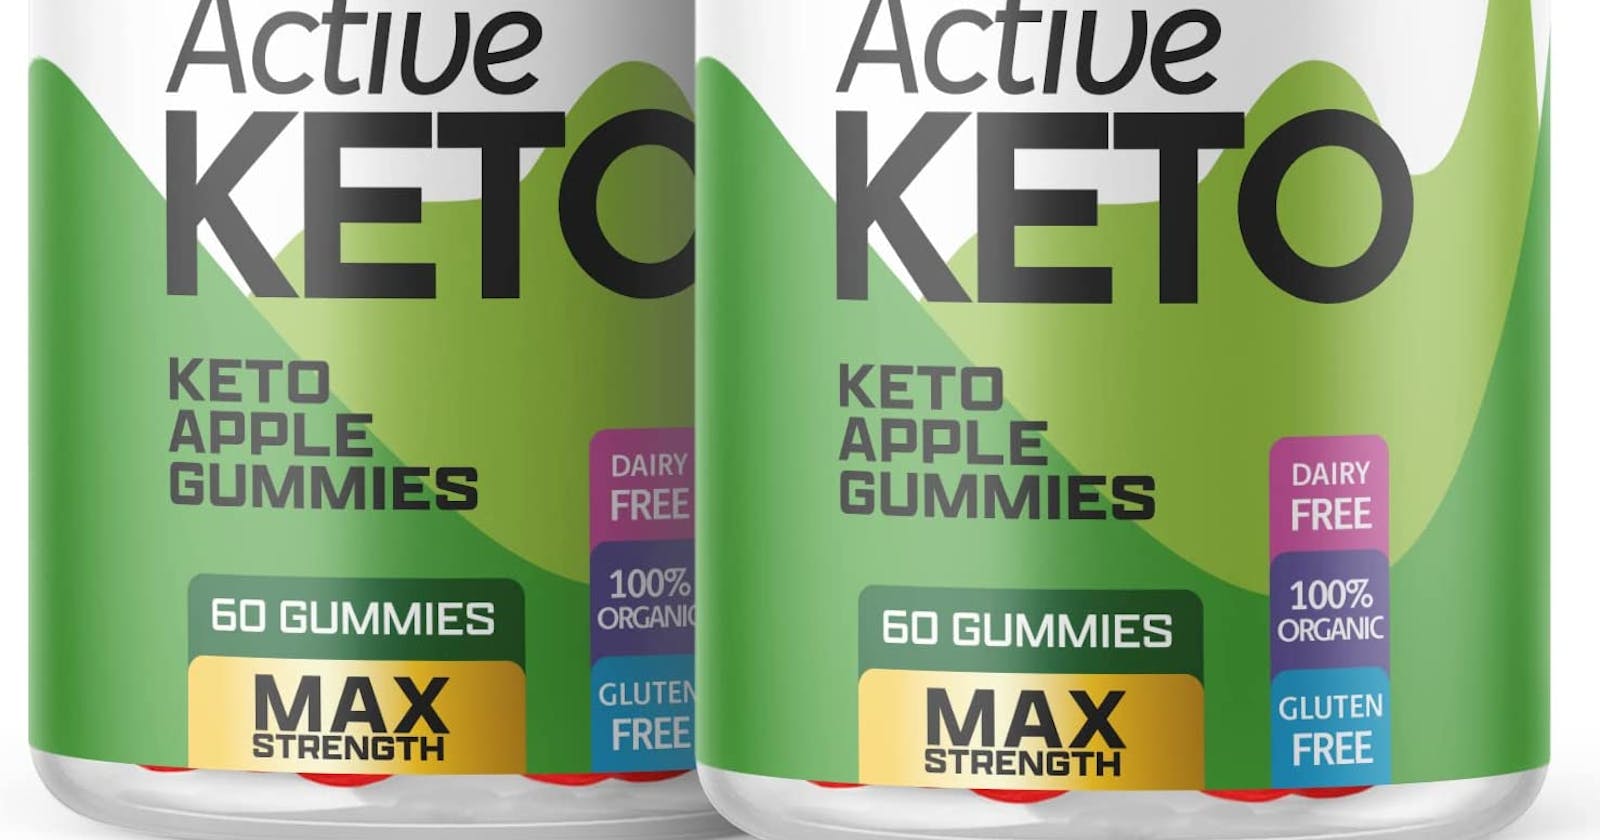 Tim McGraw Keto Gummies: A Celeb-Approved Low-Carb Delight